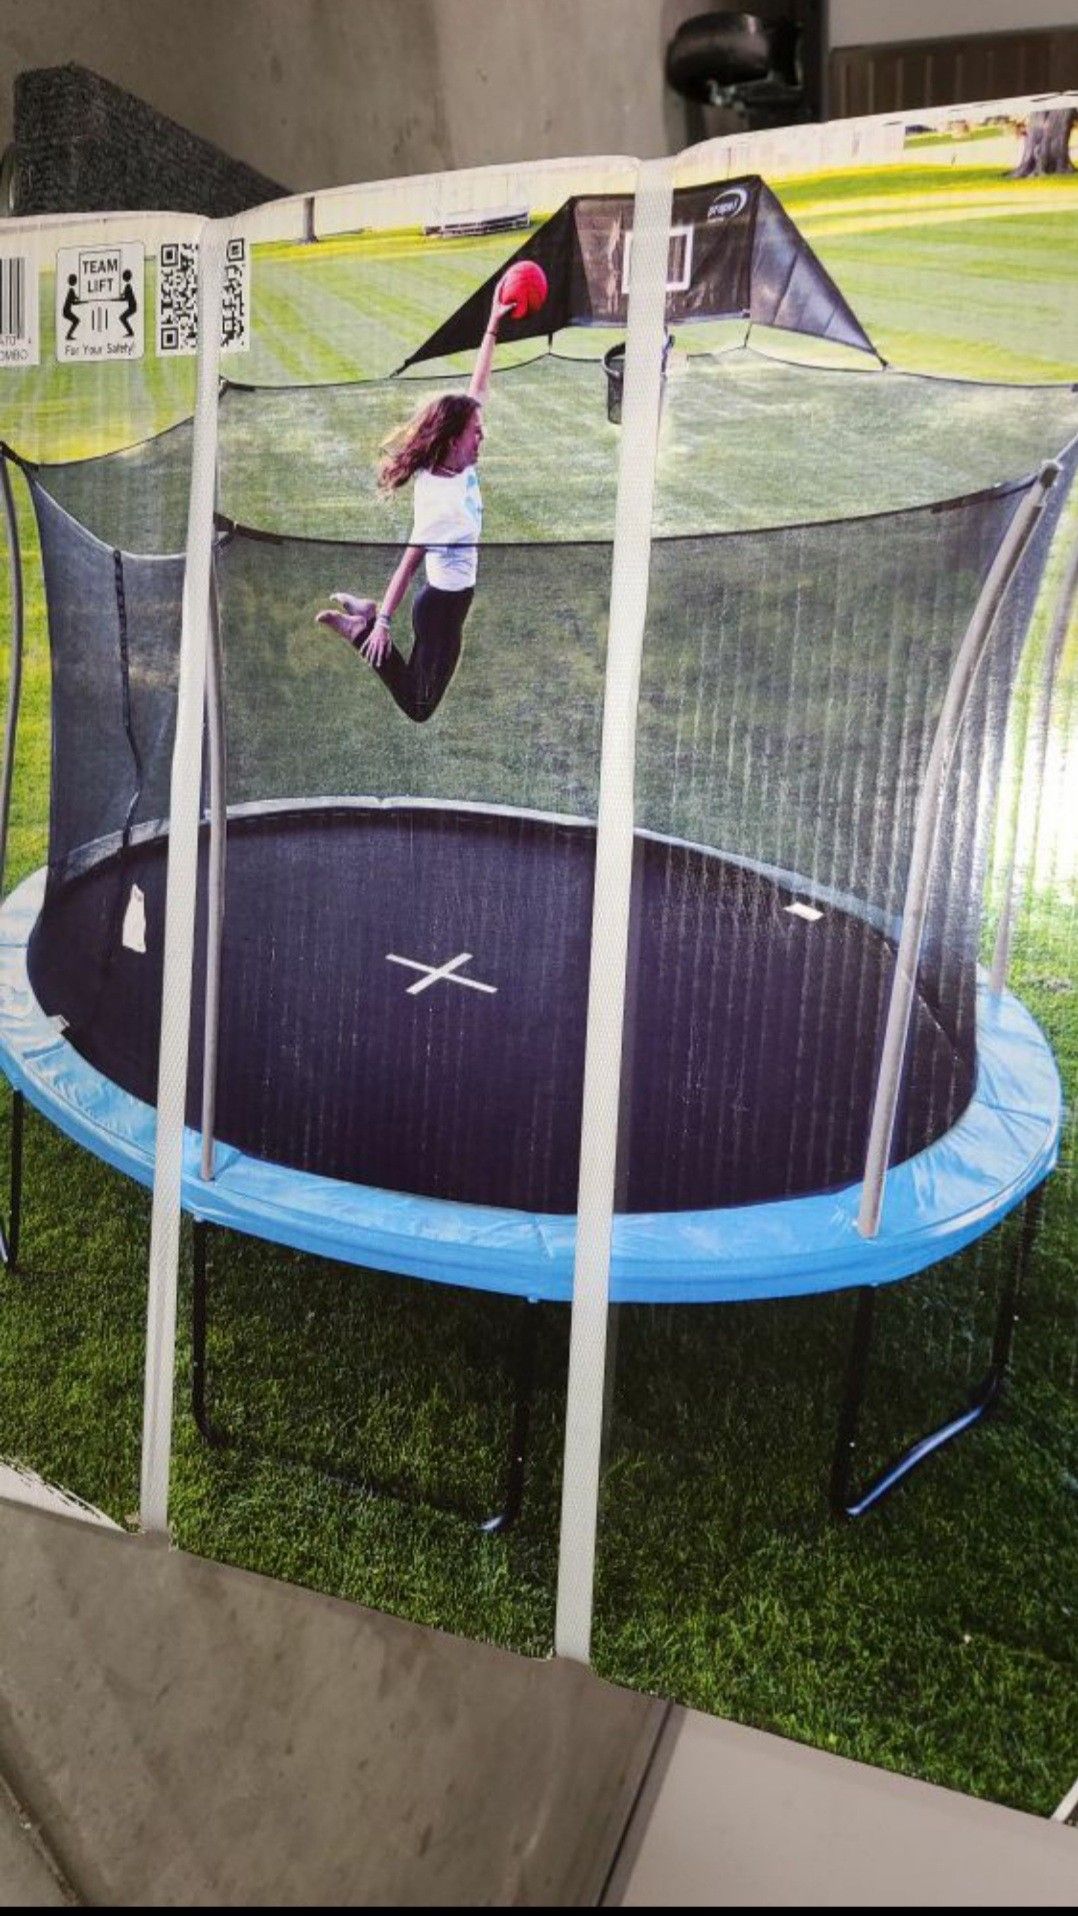 Brand new 14ft trampoline with basketball hoop and safety net